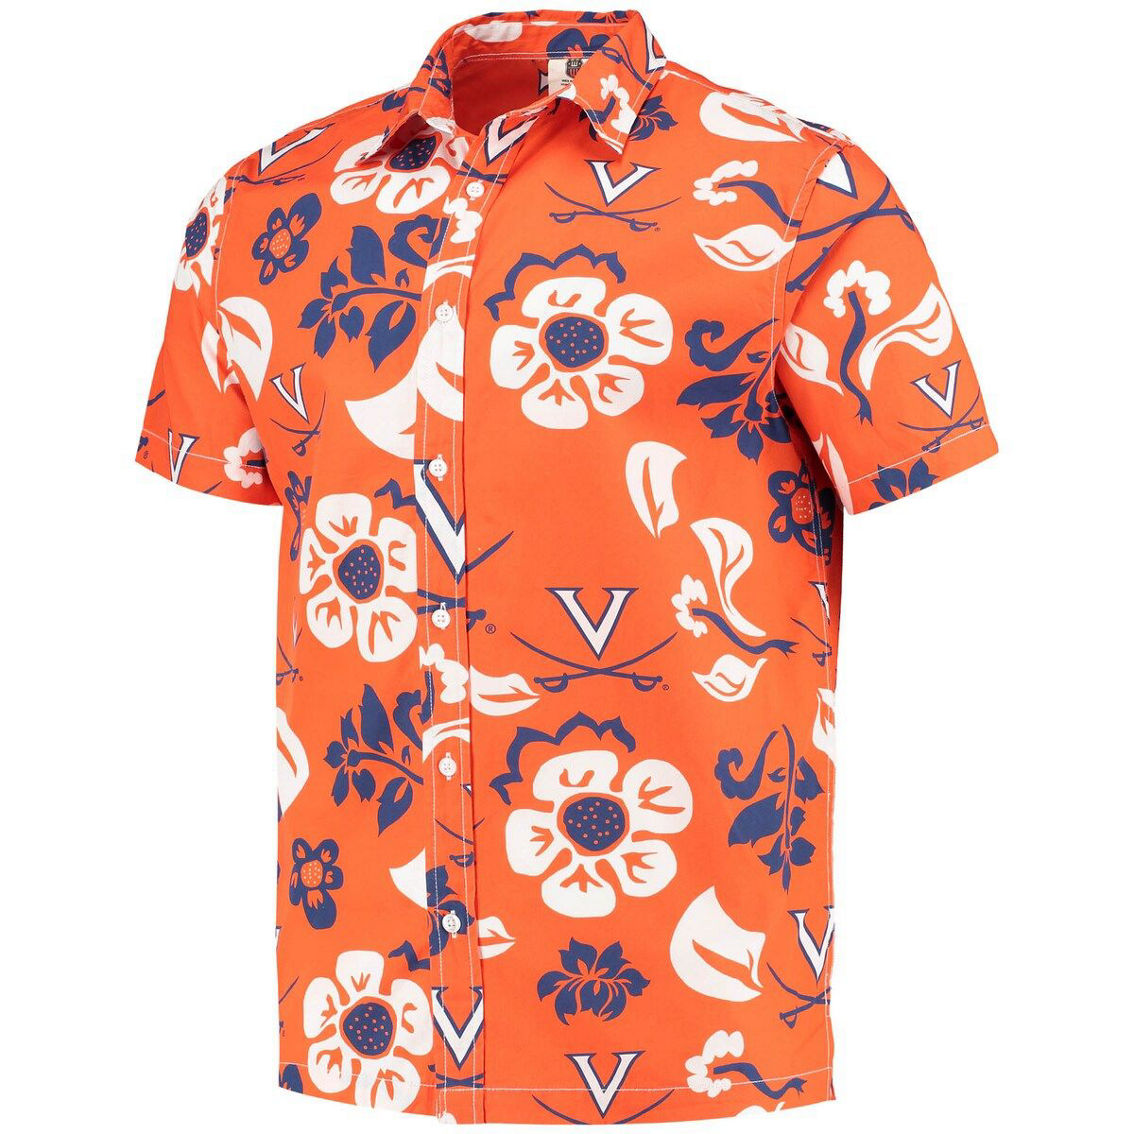 Wes & Willy Men's Orange Virginia Cavaliers Floral Button-Up Shirt - Image 3 of 4